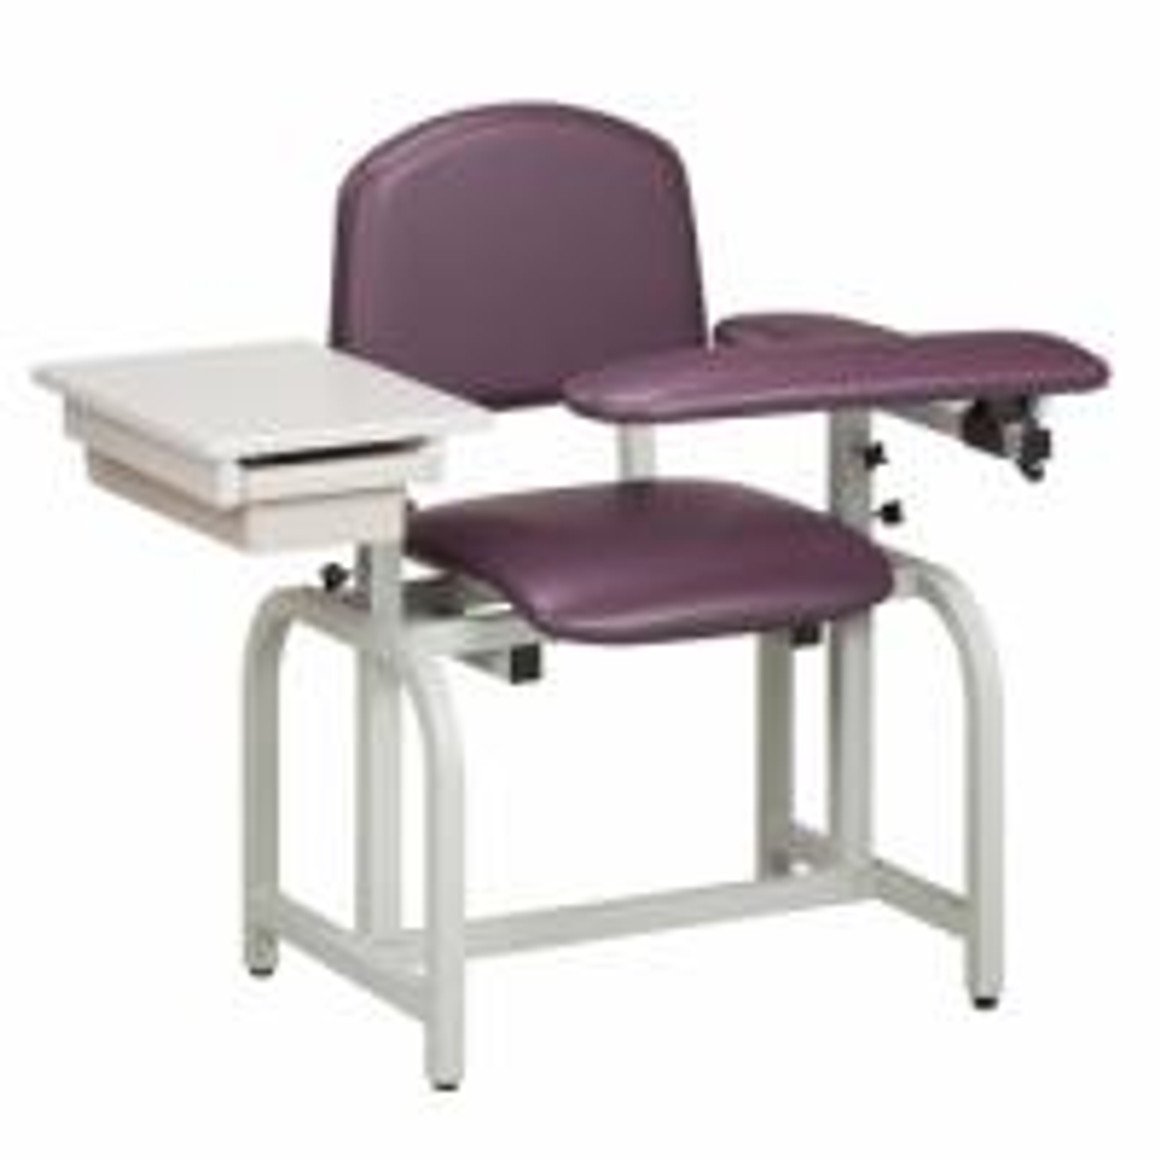 Clinton Lab X Series Blood Drawing Chair w/Padded Flip-Arm and Drawer Royal Blue